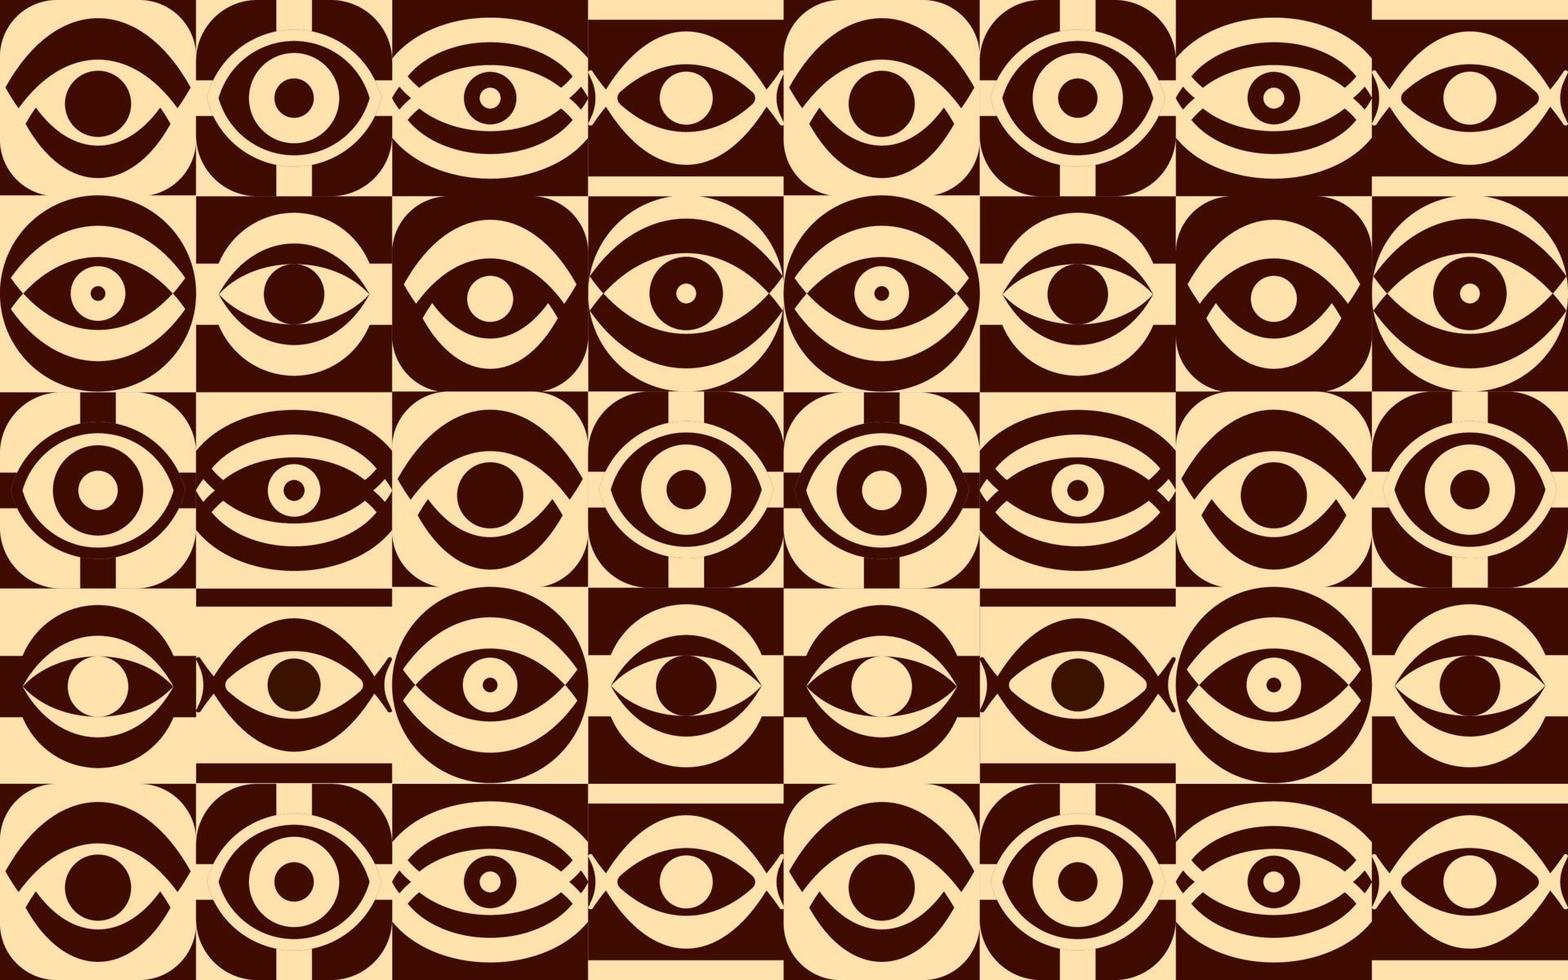 Seamless eye pattern with repeating abstract eye illustrations in brown and yellow colors. vector